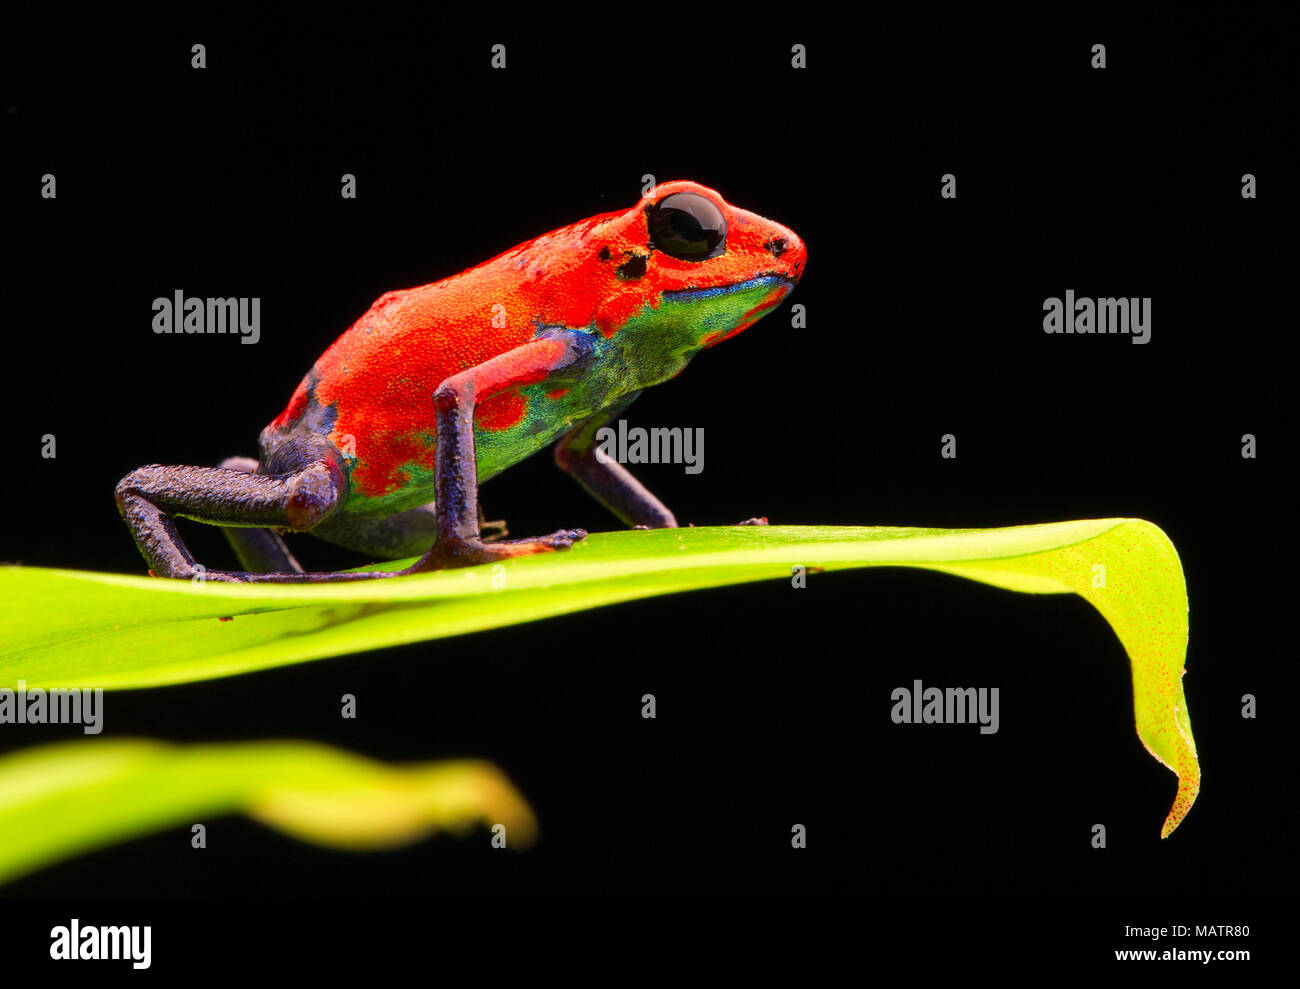 red strawberry poison dart frog Costa rica and Nicaragua. Beautiful poisonous animal from the central american tropical rain forest. Macro exotic amph Stock Photo